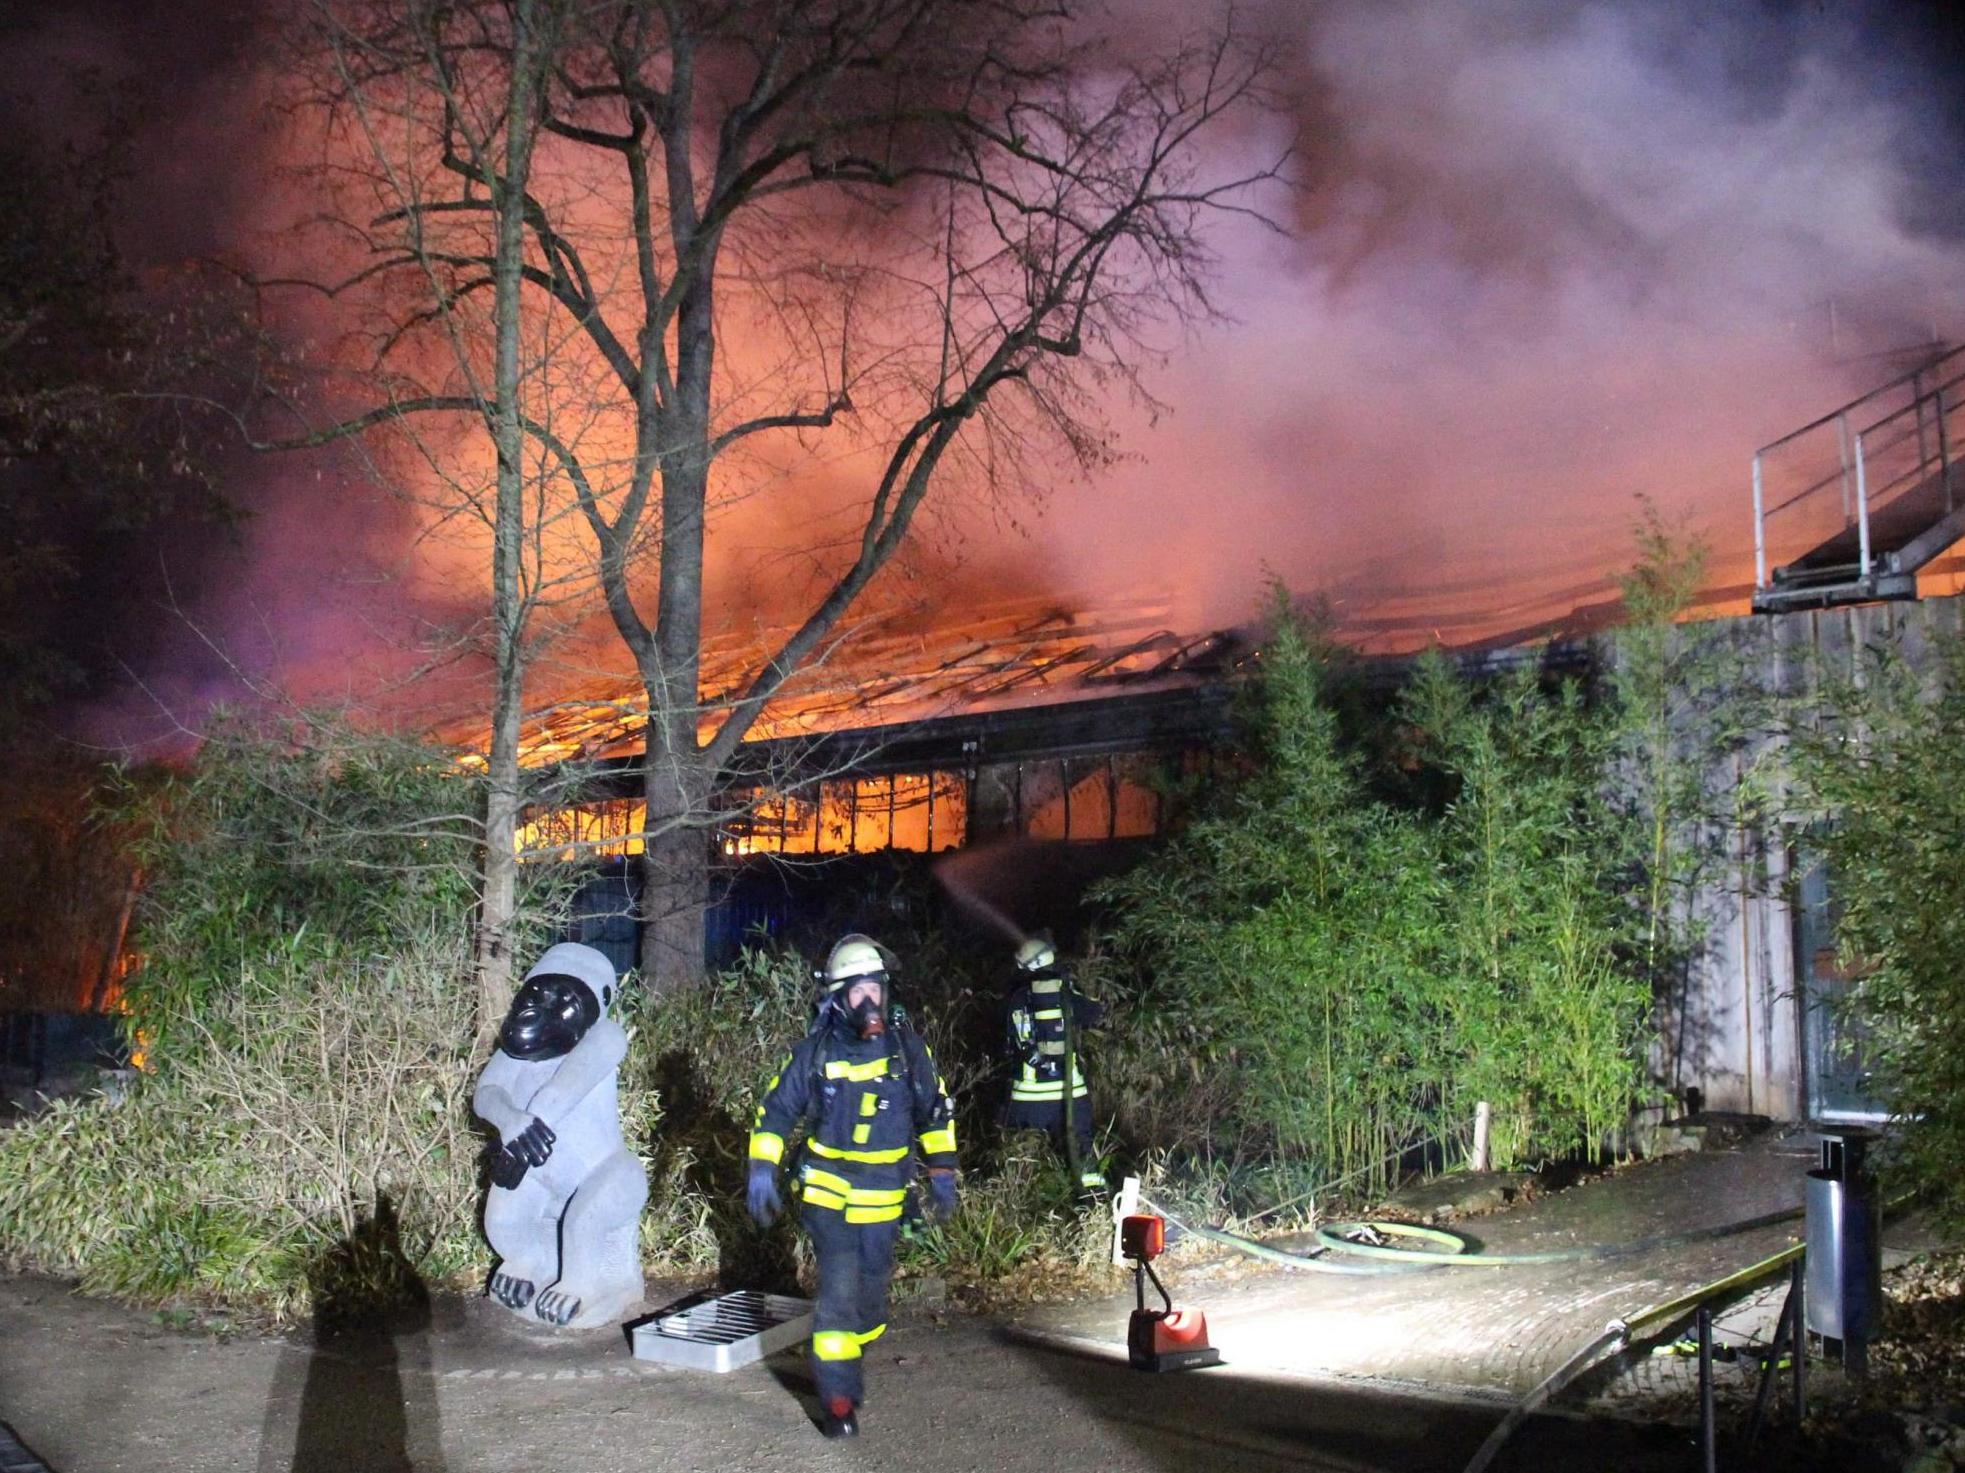 Police and firefighters responded to reports of a fire at the zoo’s monkey house shortly after midnight on New Year’s Day